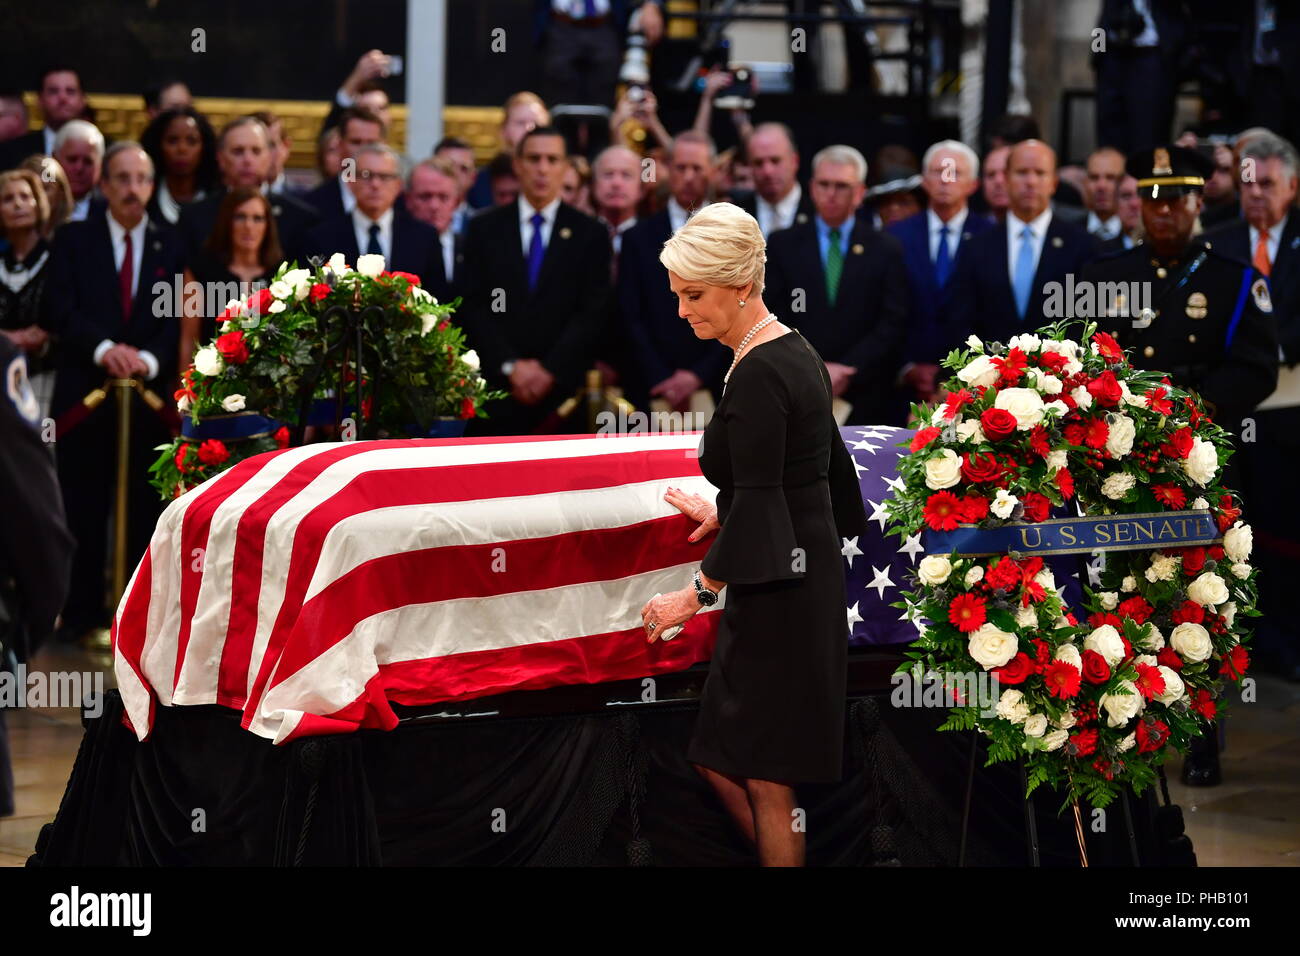 Cindy McCain touches the casket of former Senator John McCain in the Capitol Rotunda where he will lie in state at the U.S. Capitol, in Washington, DC on Friday, August 31, 2018. McCain, an Arizona Republican, presidential candidate and war hero died August 25th at the age of 81. He is the 31st person to lie in state at the Capitol in 166 years. Photo by Kevin Dietsch/UPI | usage worldwide Stock Photo